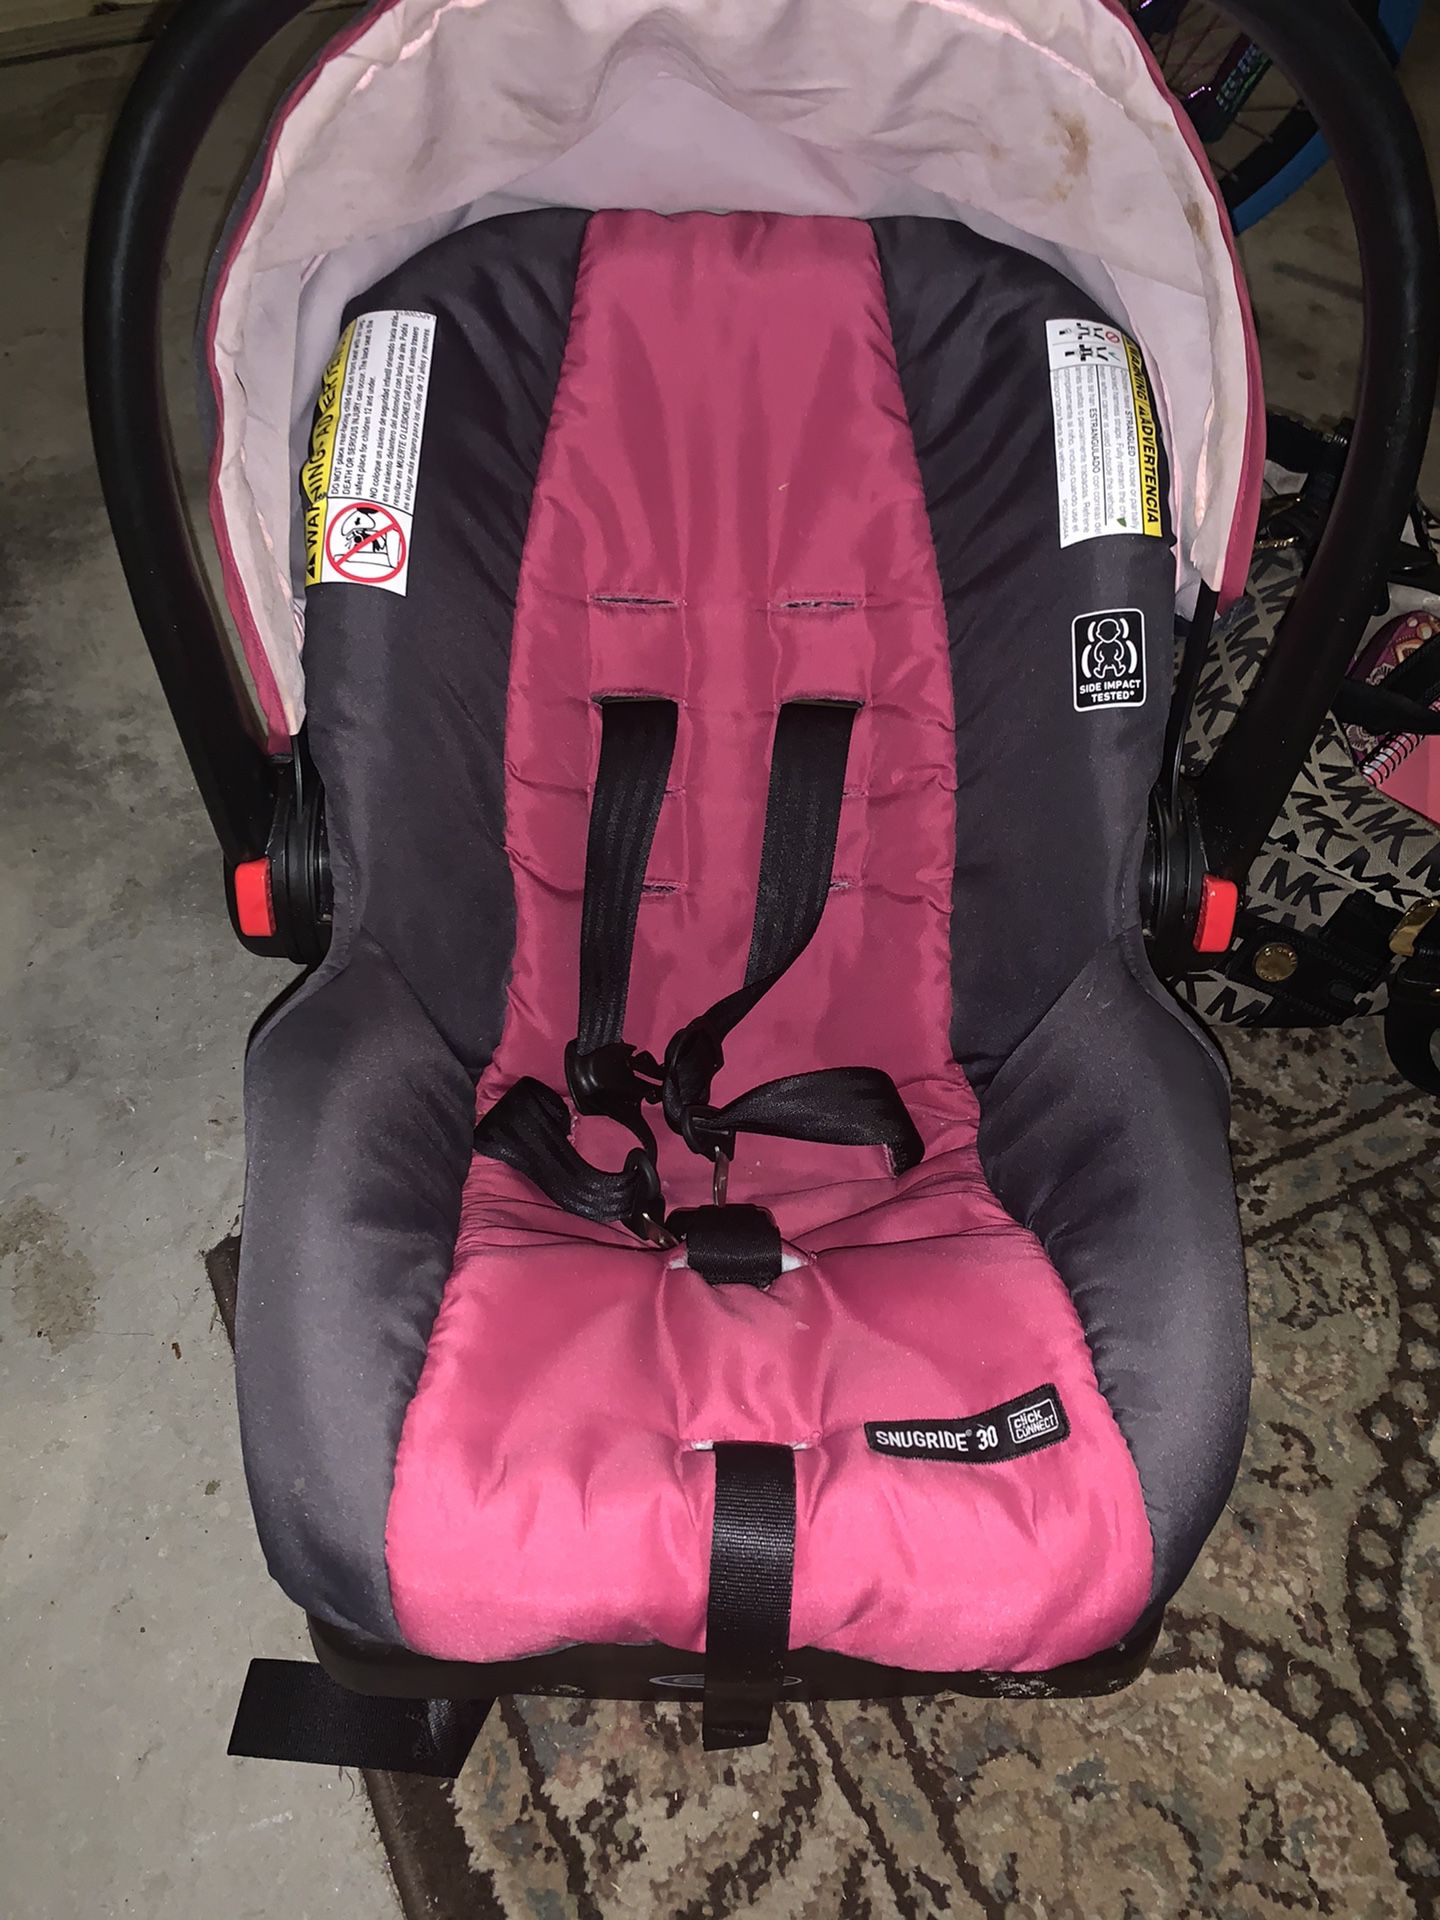 Snugride car seat and base